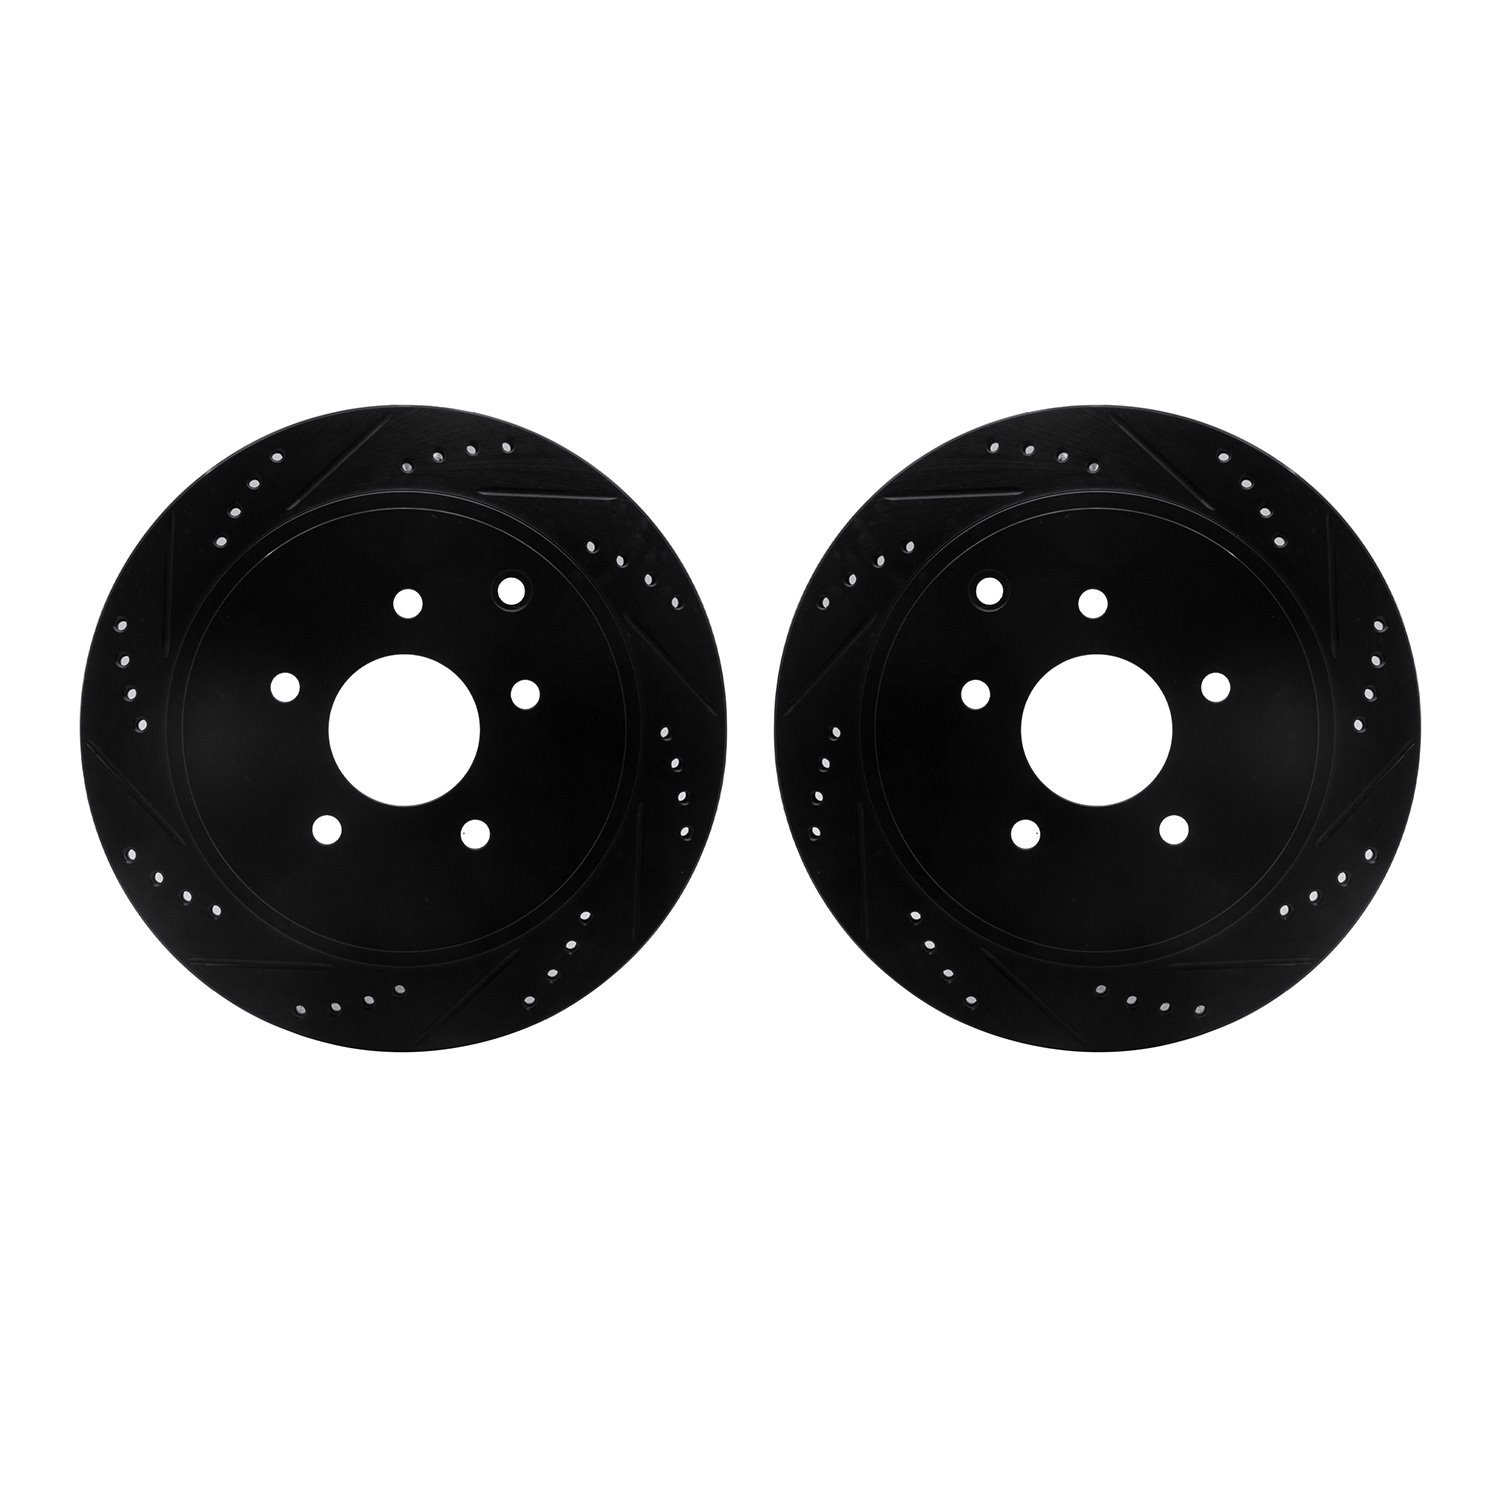 8002-67079 Drilled/Slotted Brake Rotors [Black], Fits Select Infiniti/Nissan, Position: Rear